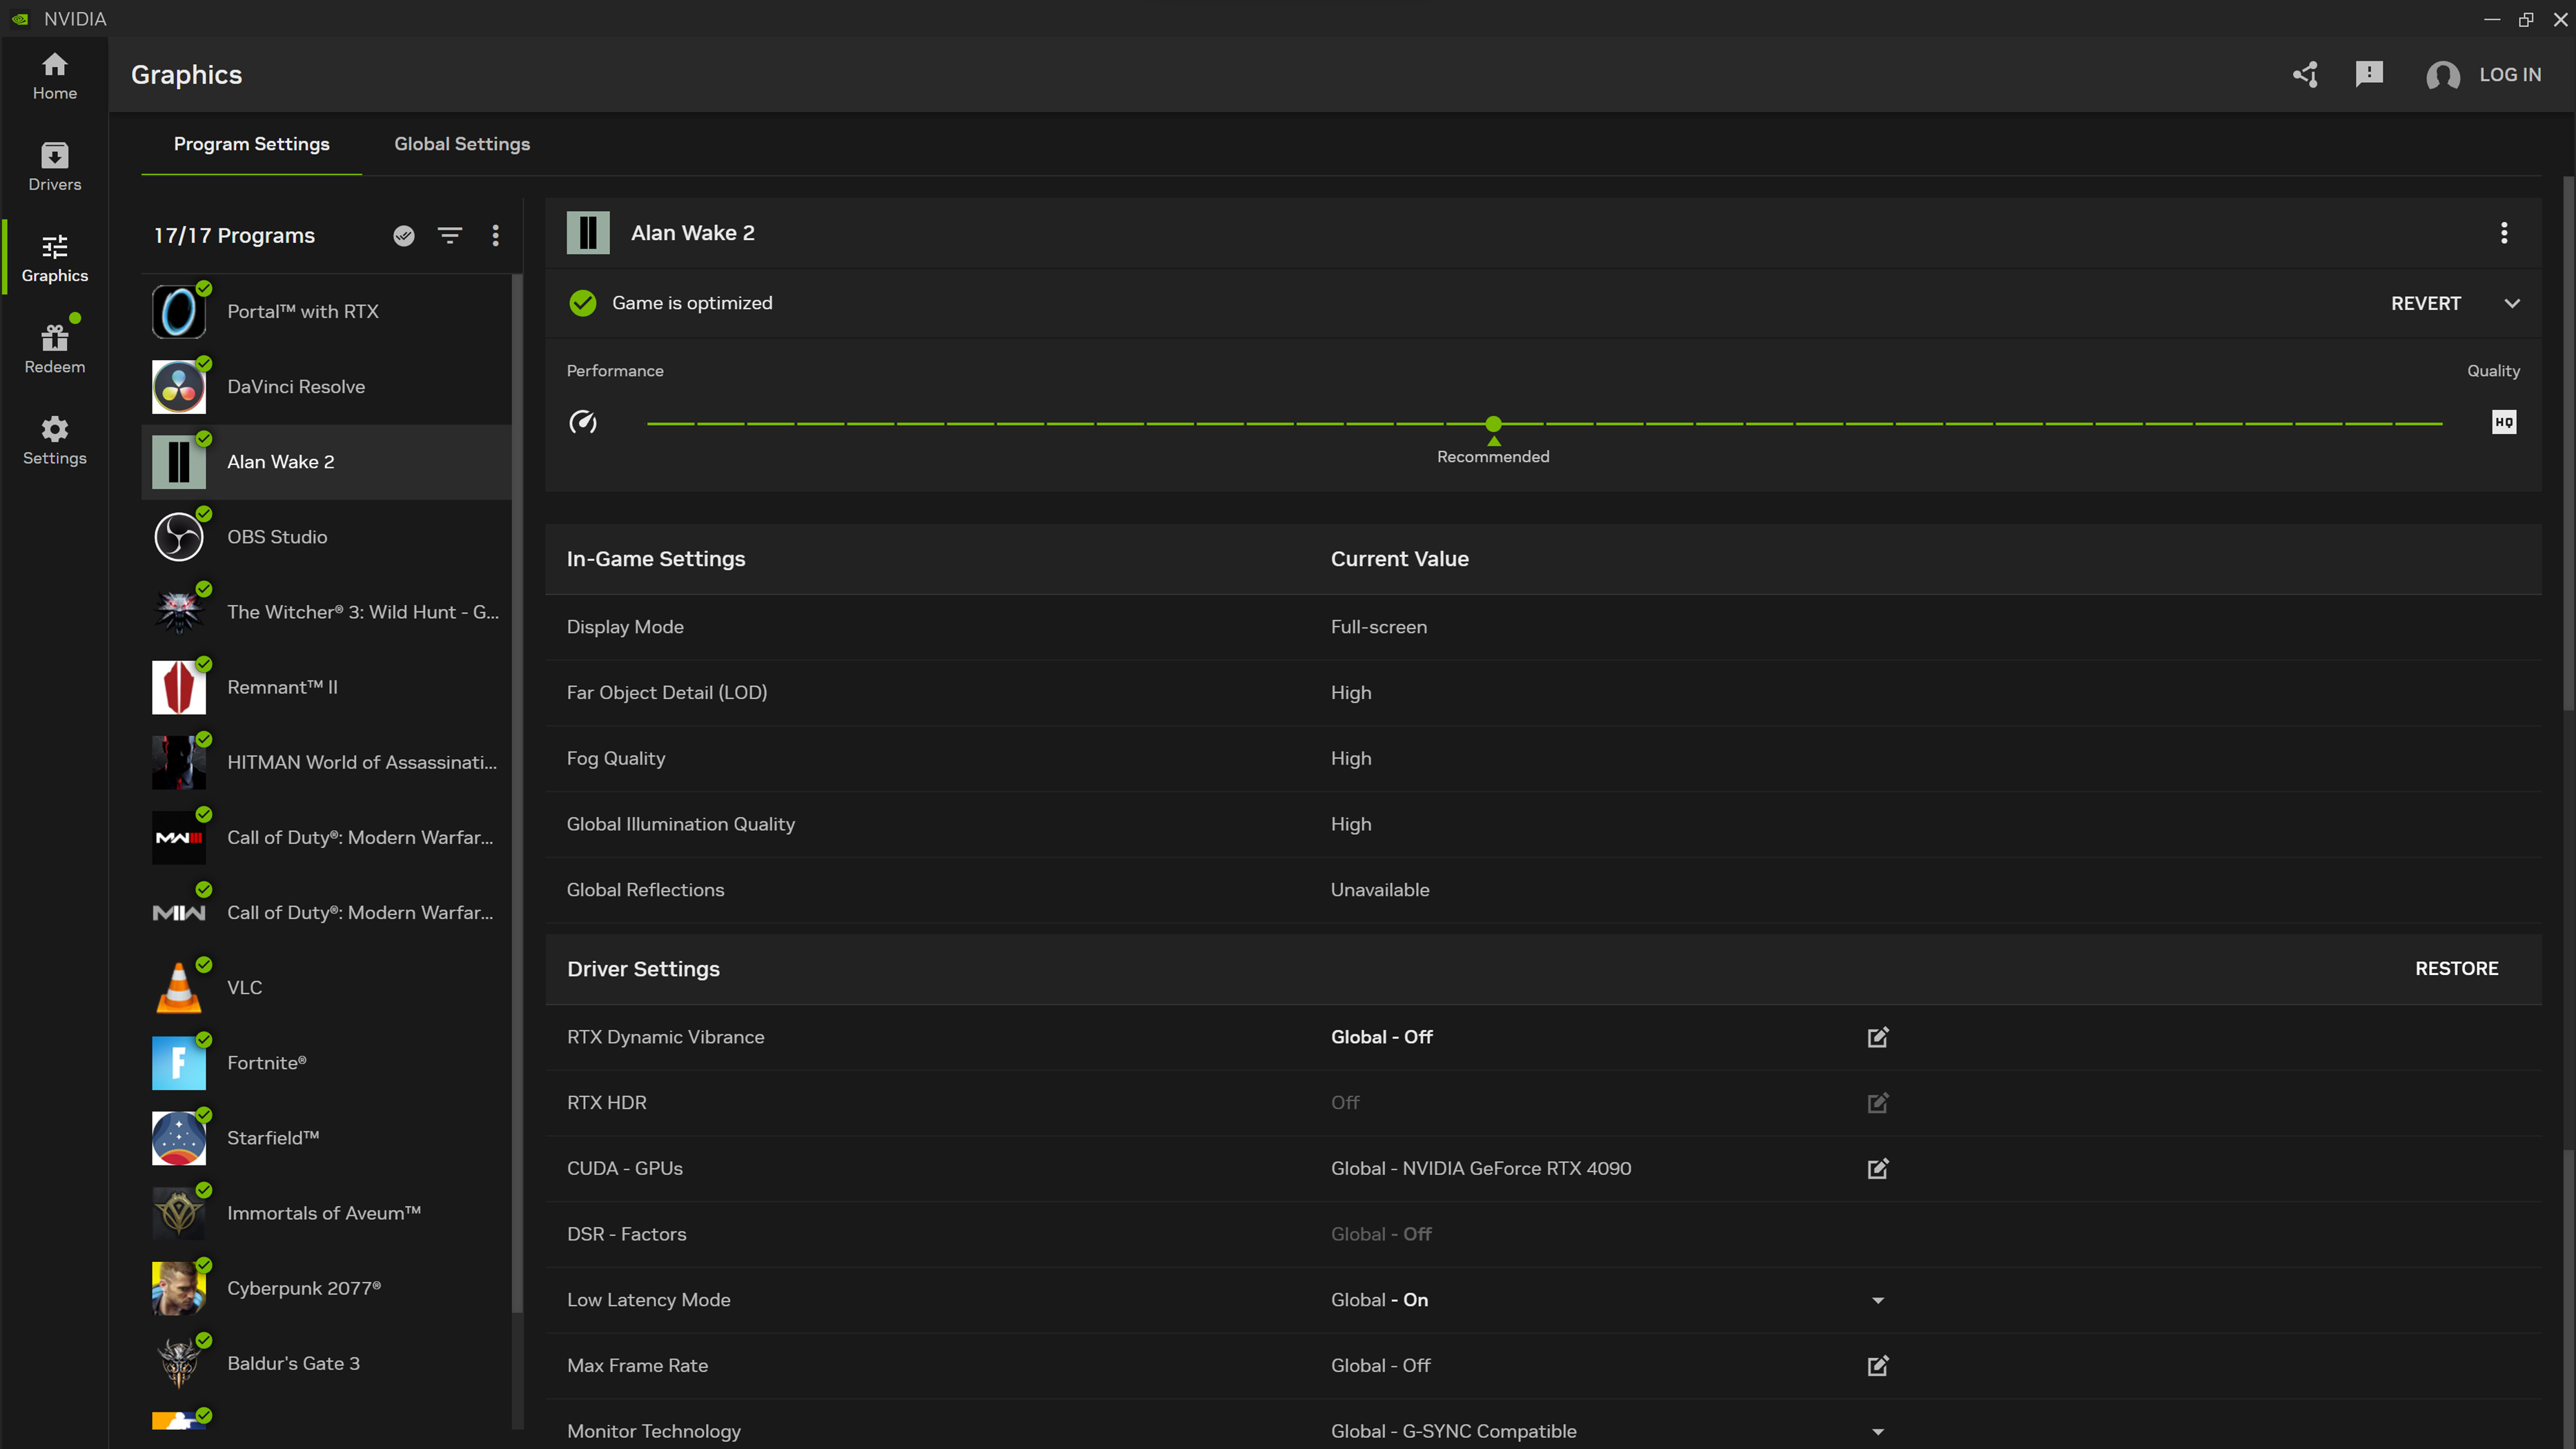 The new unified GPU control center with in-game settings and driver settings